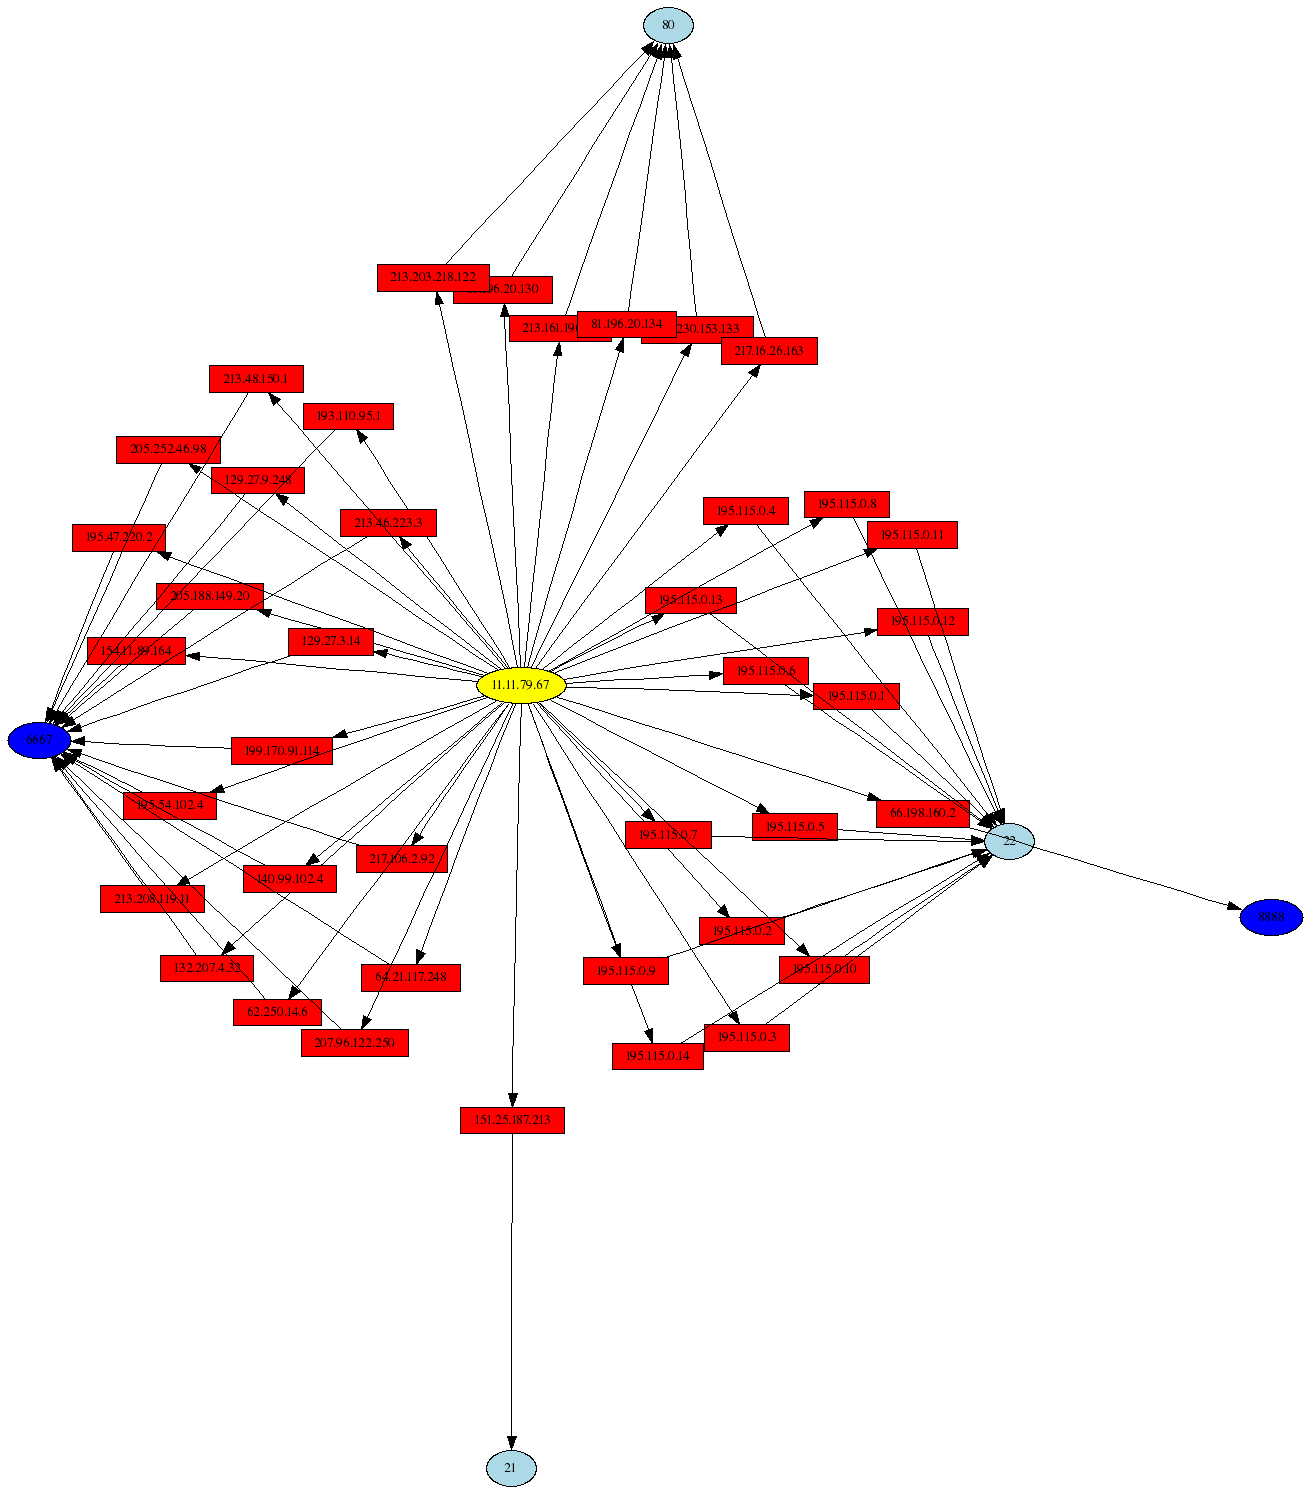 Compromised Honeynet system: Link graph of outbound connections